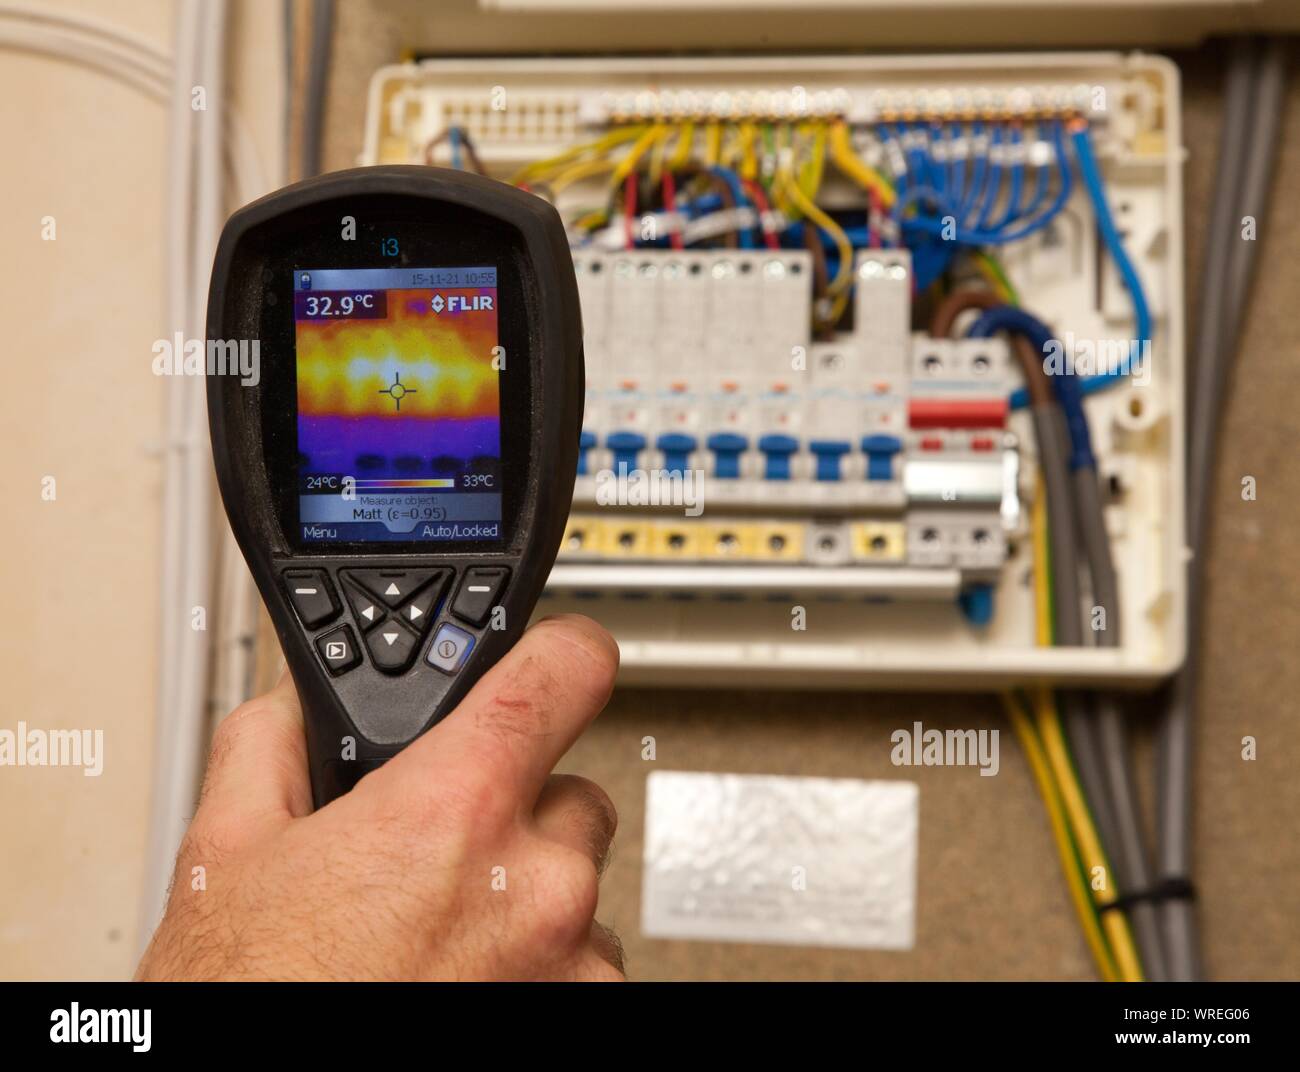 Using a thermal imaging device camera to test a mains electricity consumer unit, fuse box. Stock Photo